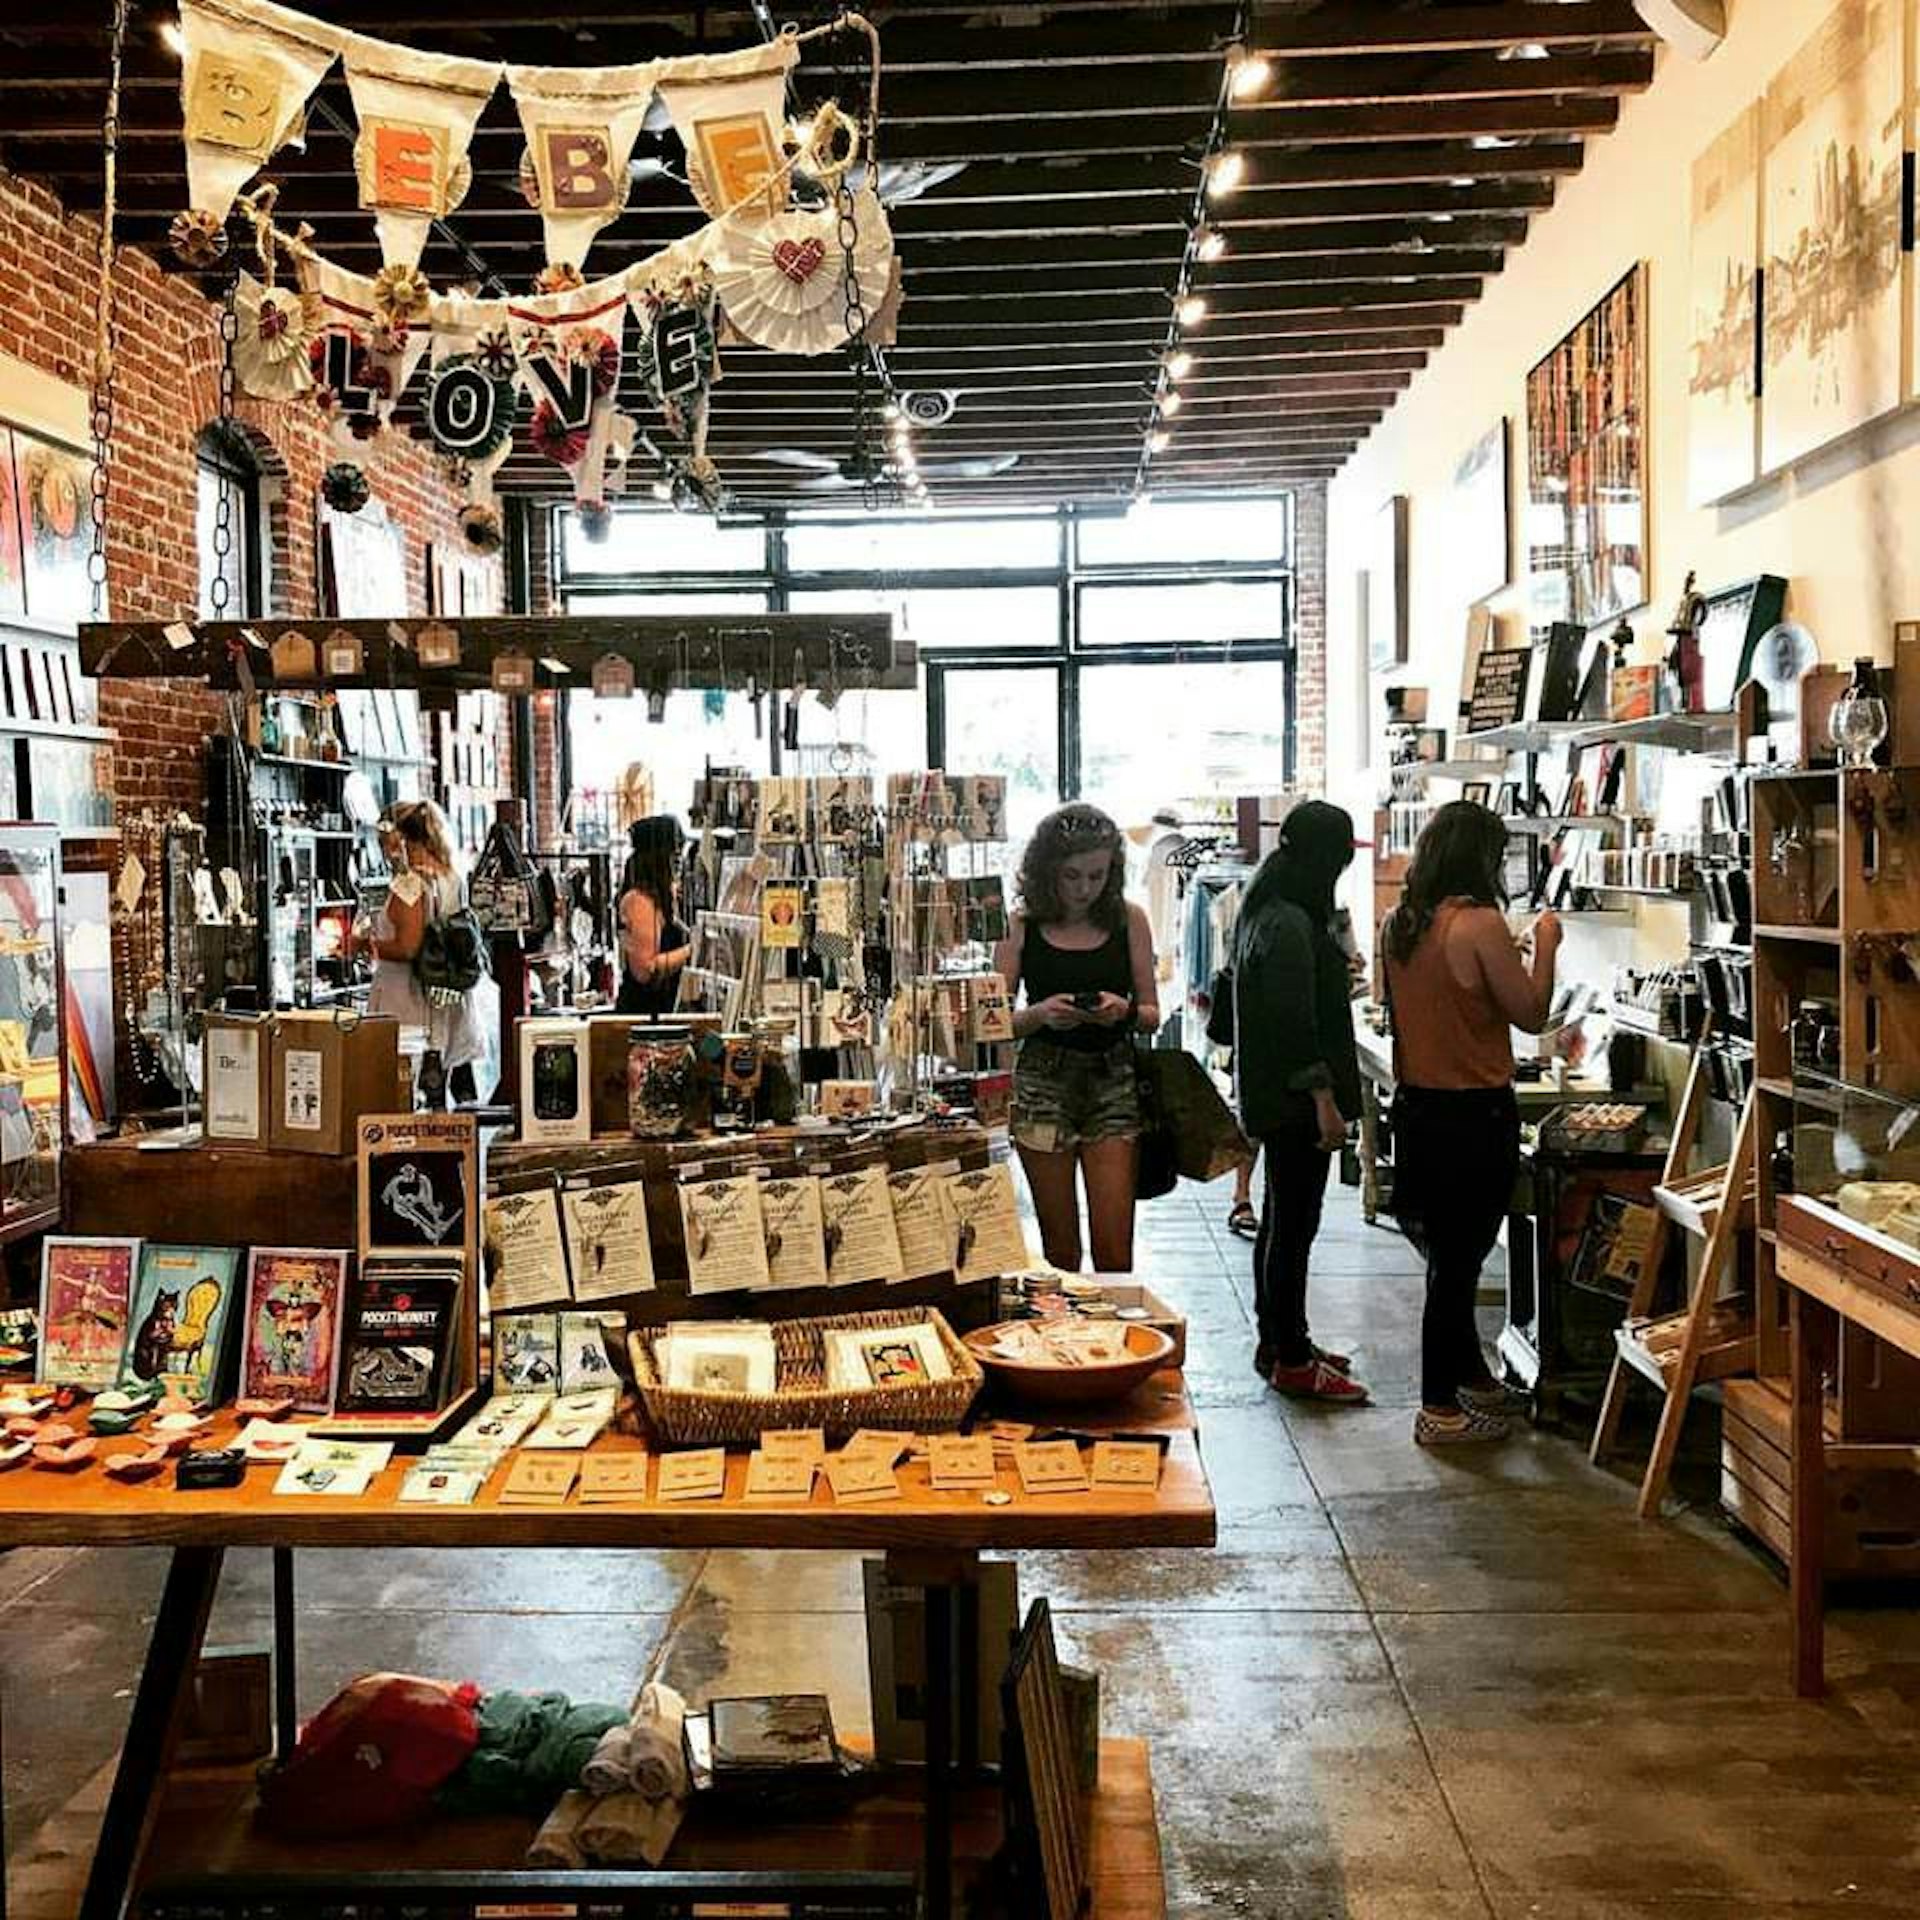 Shoppers browse through a rustic shop, with handmade goods all around